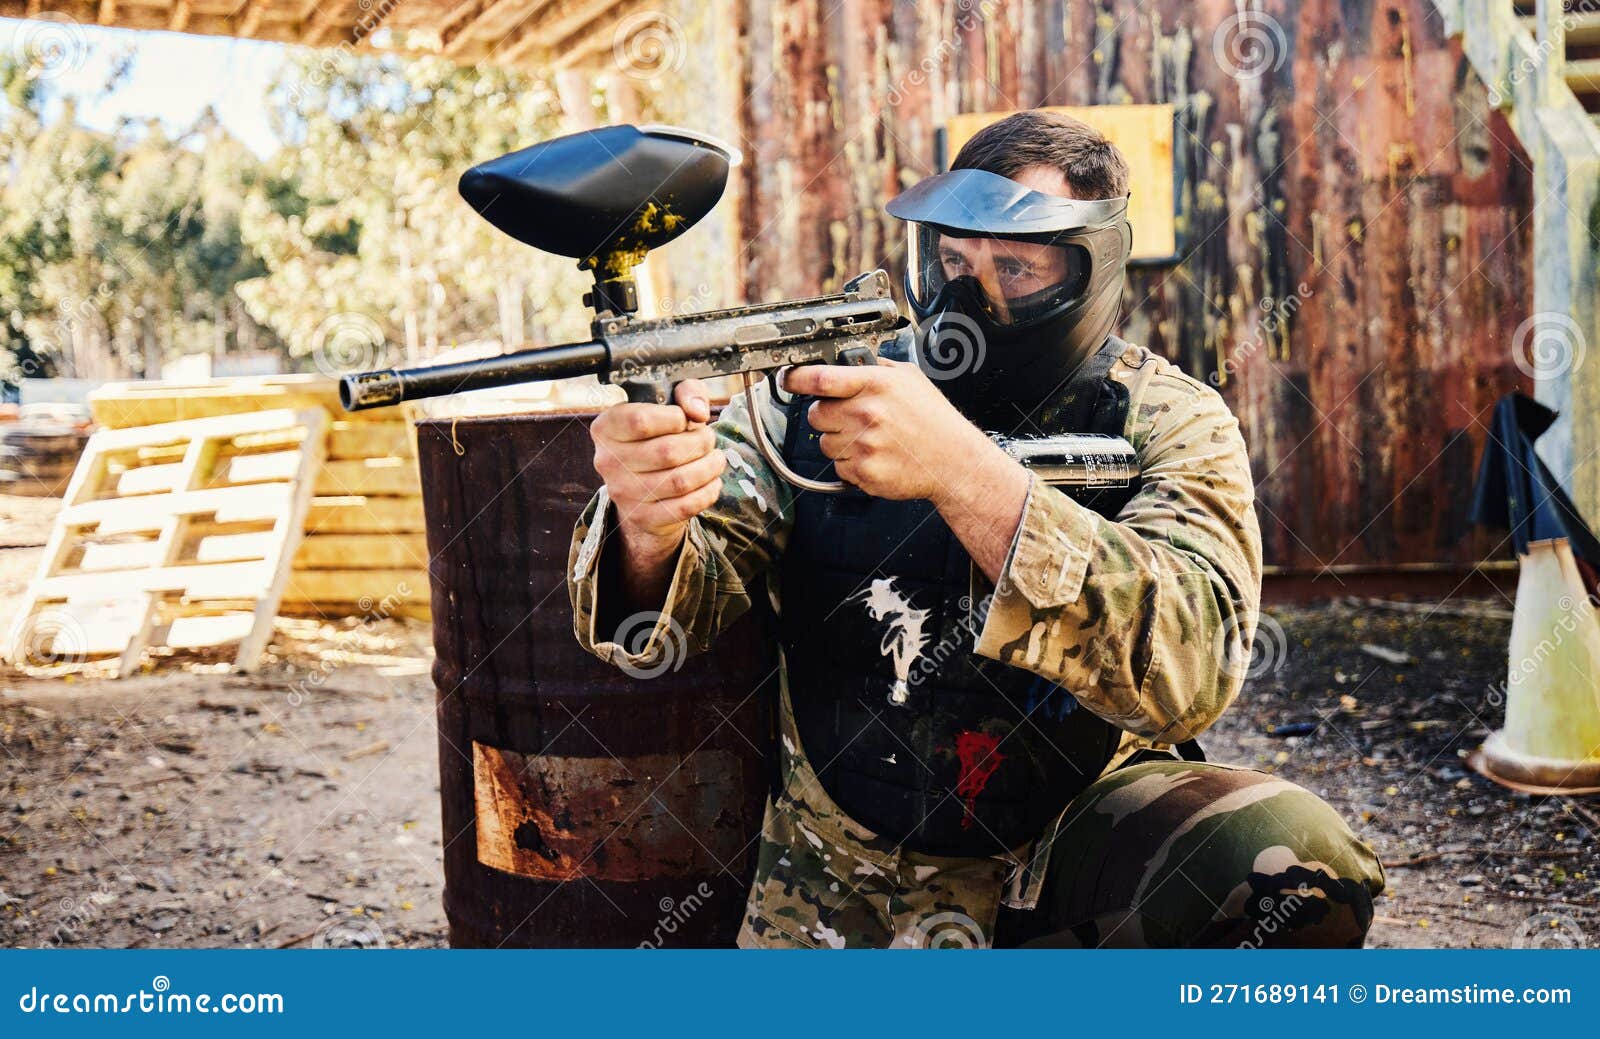 Paintball, Target Training or Man with Gun in Shooting Game Playing with on Fun Battlefield Mission